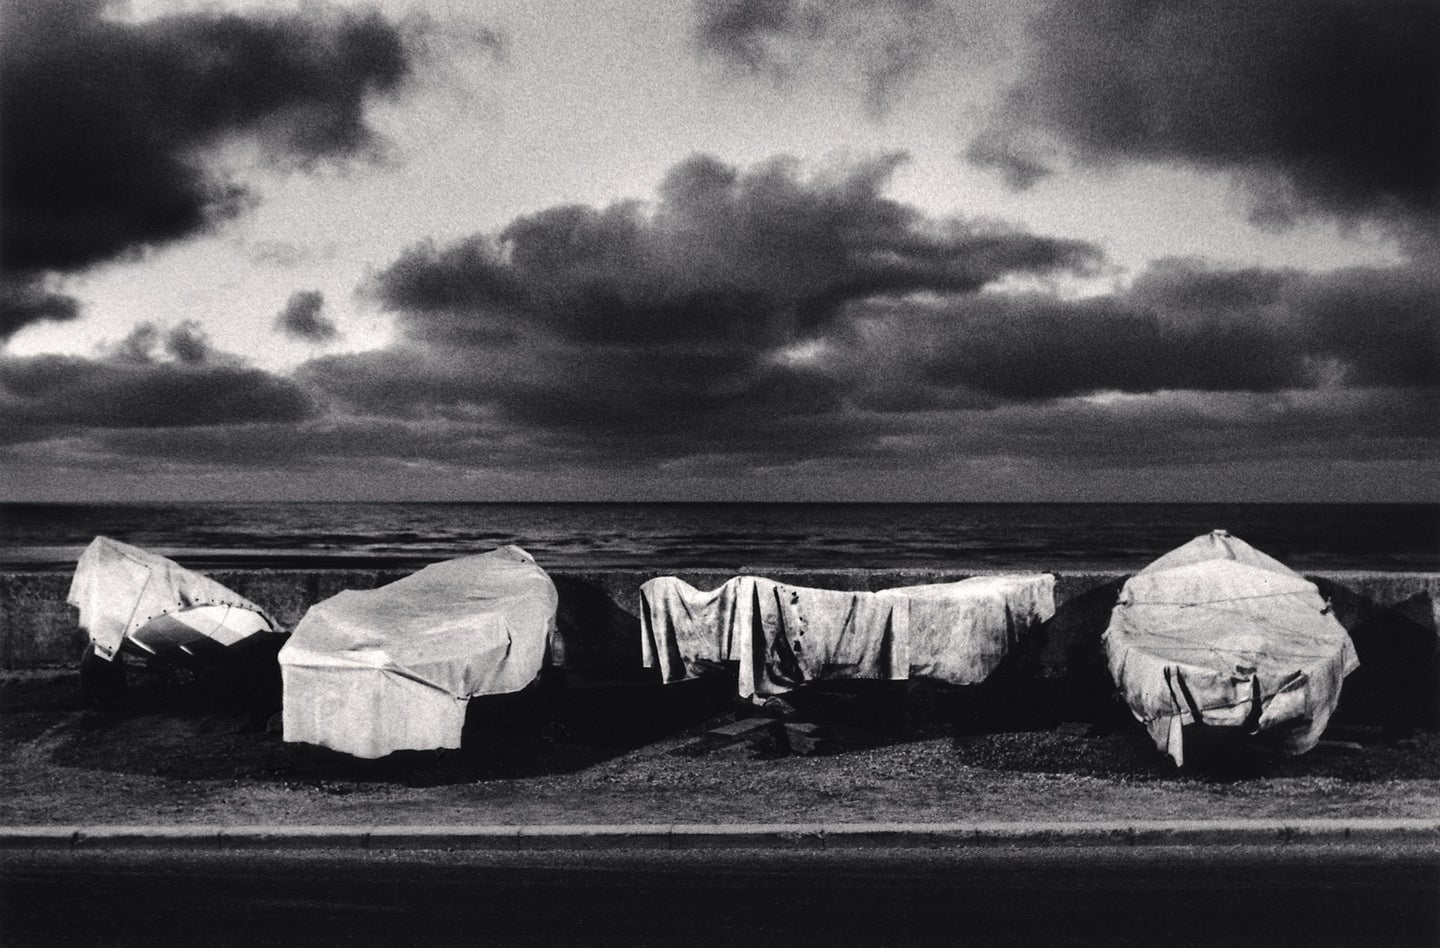 A black and white photo of draped boats along the seaside.